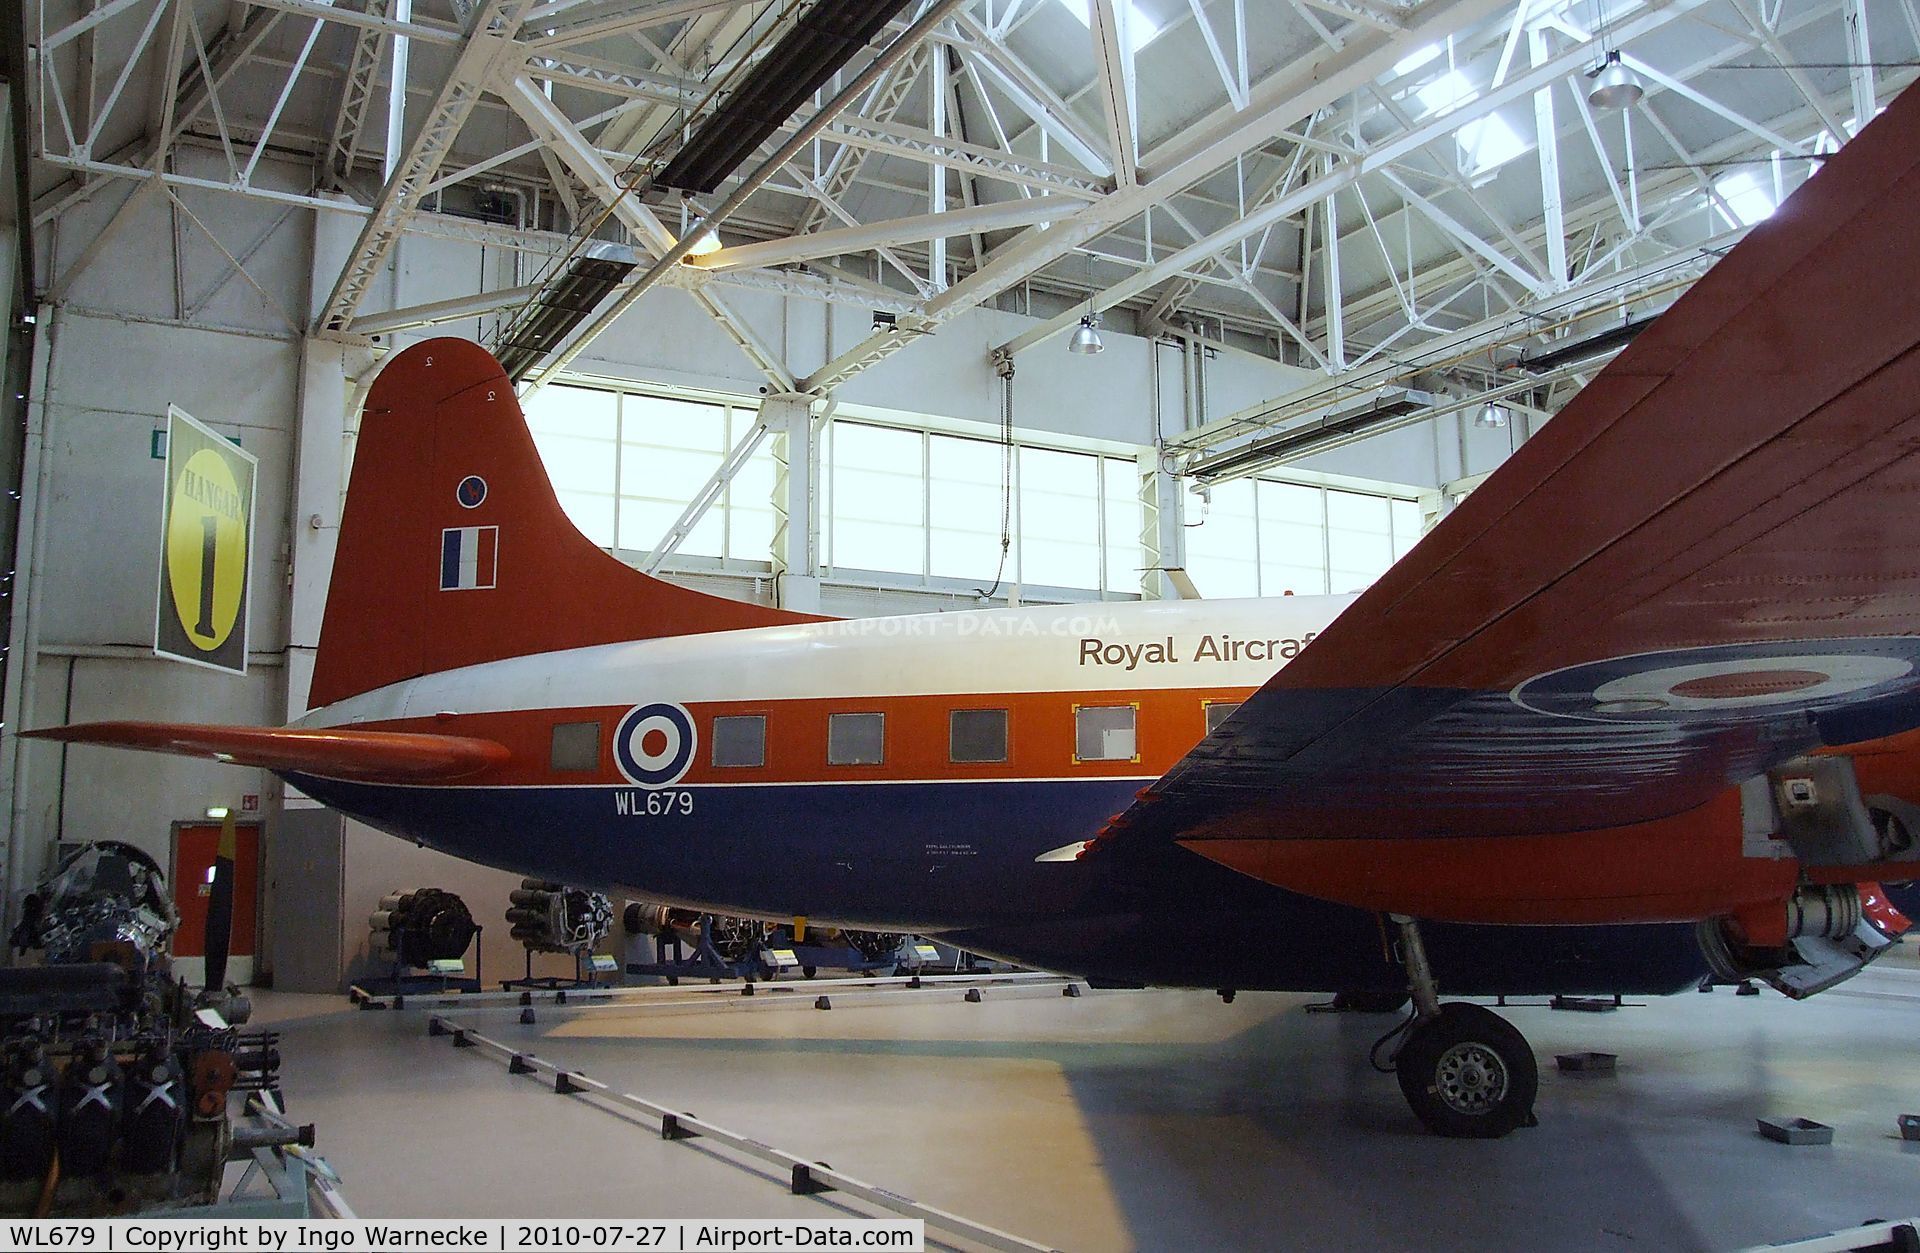 WL679, 1953 Vickers Varsity T.1 C/N Not found WL679, Vickers Varsity T1 at the RAF Museum, Cosford